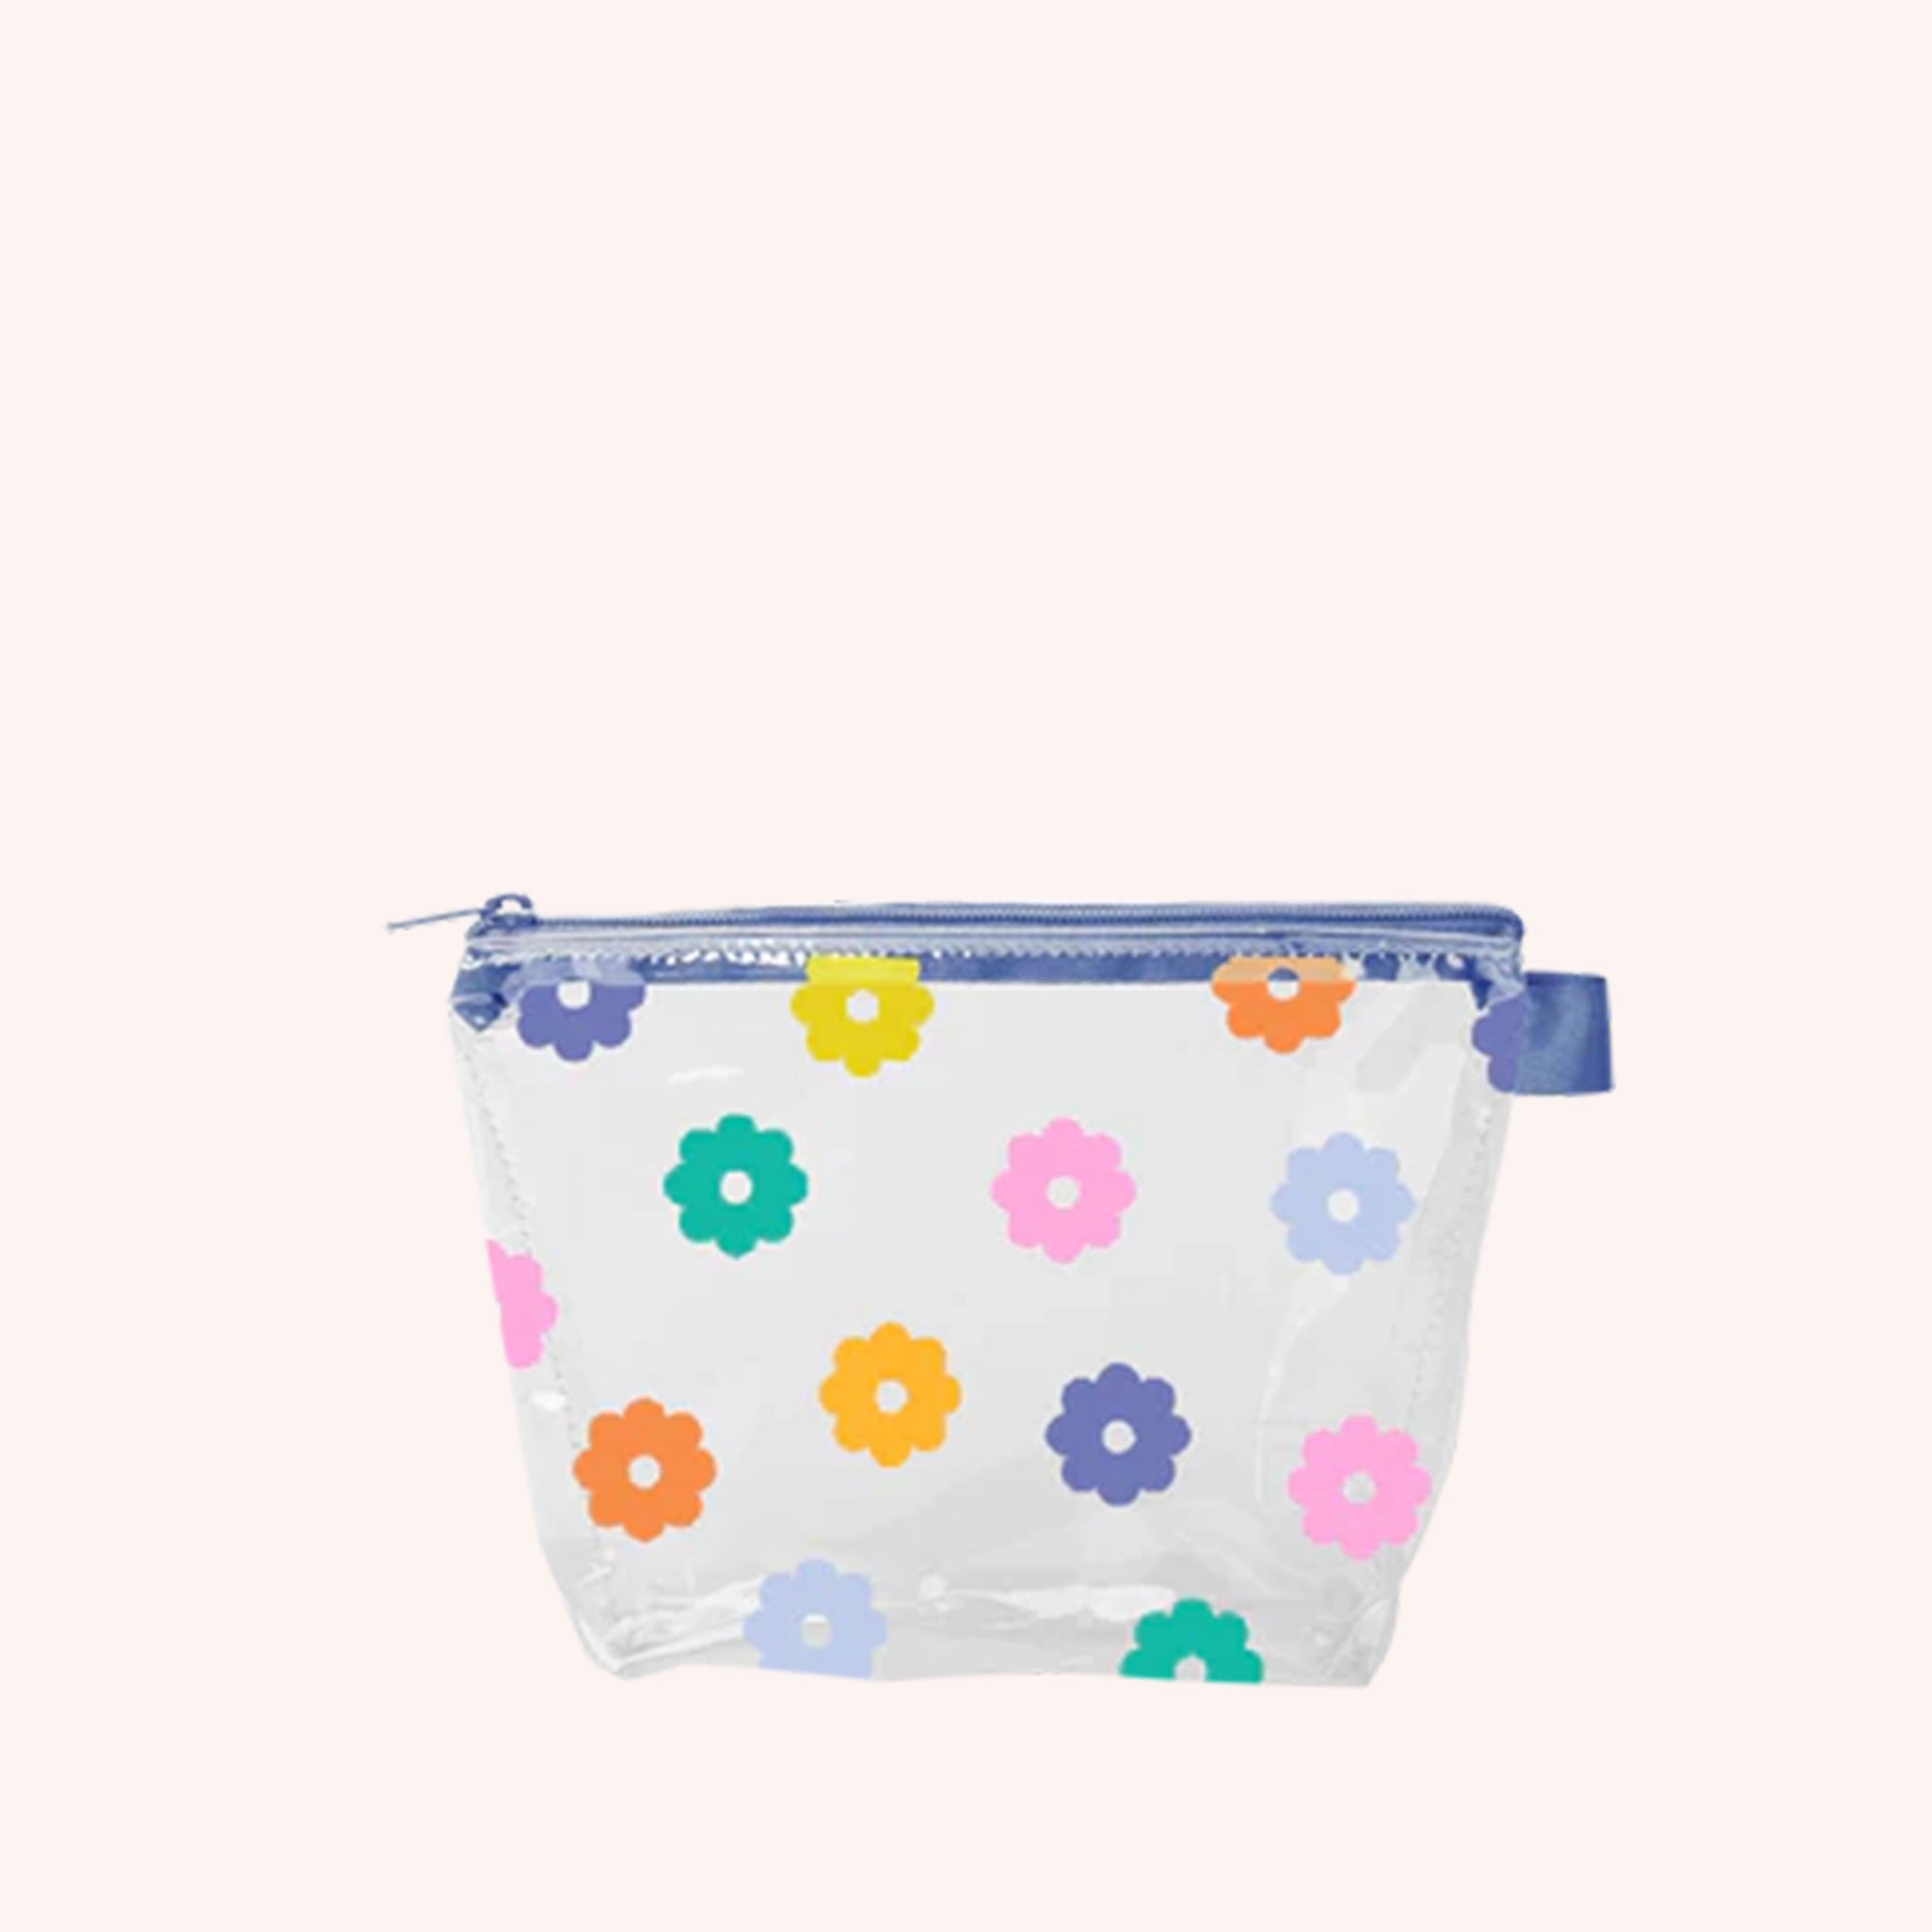 A clear bag with multicolored daisies and a single zipper going across the top.